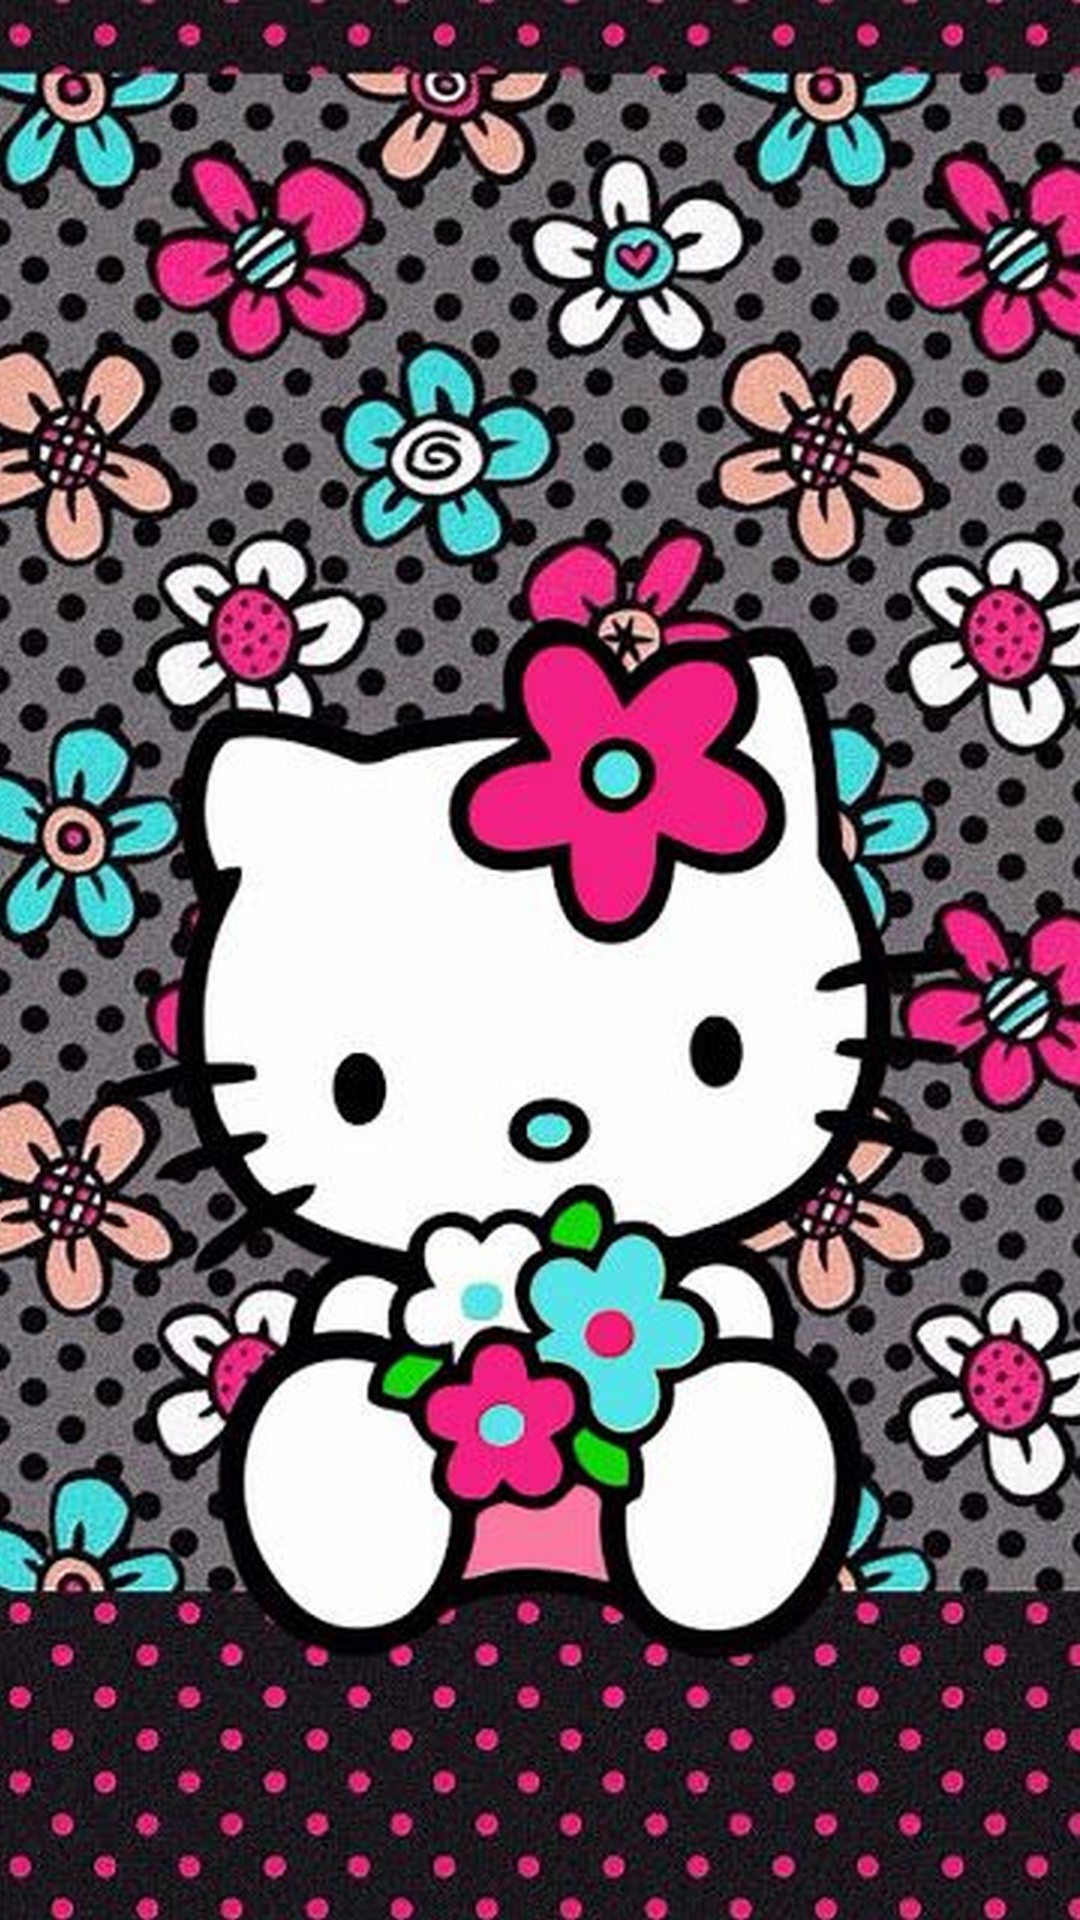 Wallpaper iPhone Hello Kitty Images with image resolution 1080x1920 pixel. You can make this wallpaper for your iPhone 5, 6, 7, 8, X backgrounds, Mobile Screensaver, or iPad Lock Screen